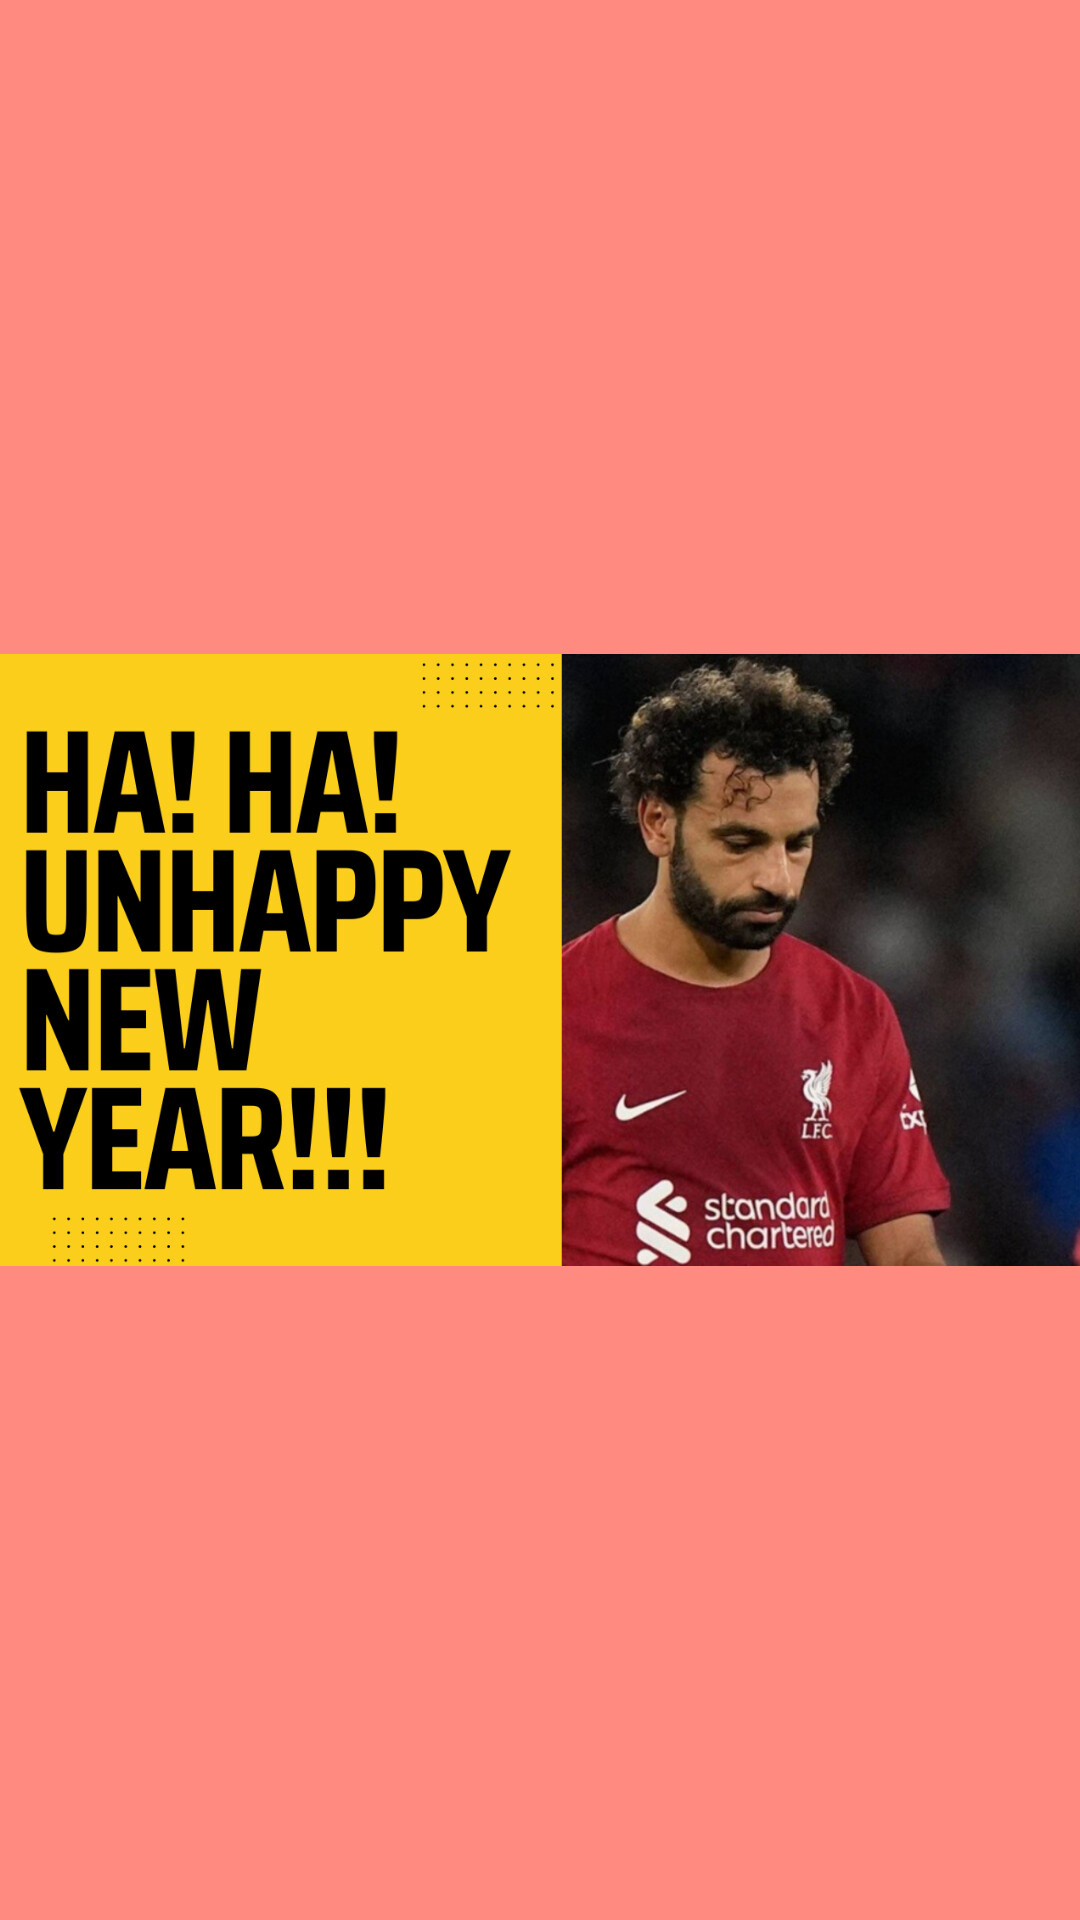 Happy New Year Except For Liverpool, Chelsea, Man City, Southampton, & Spurs!!!!!!